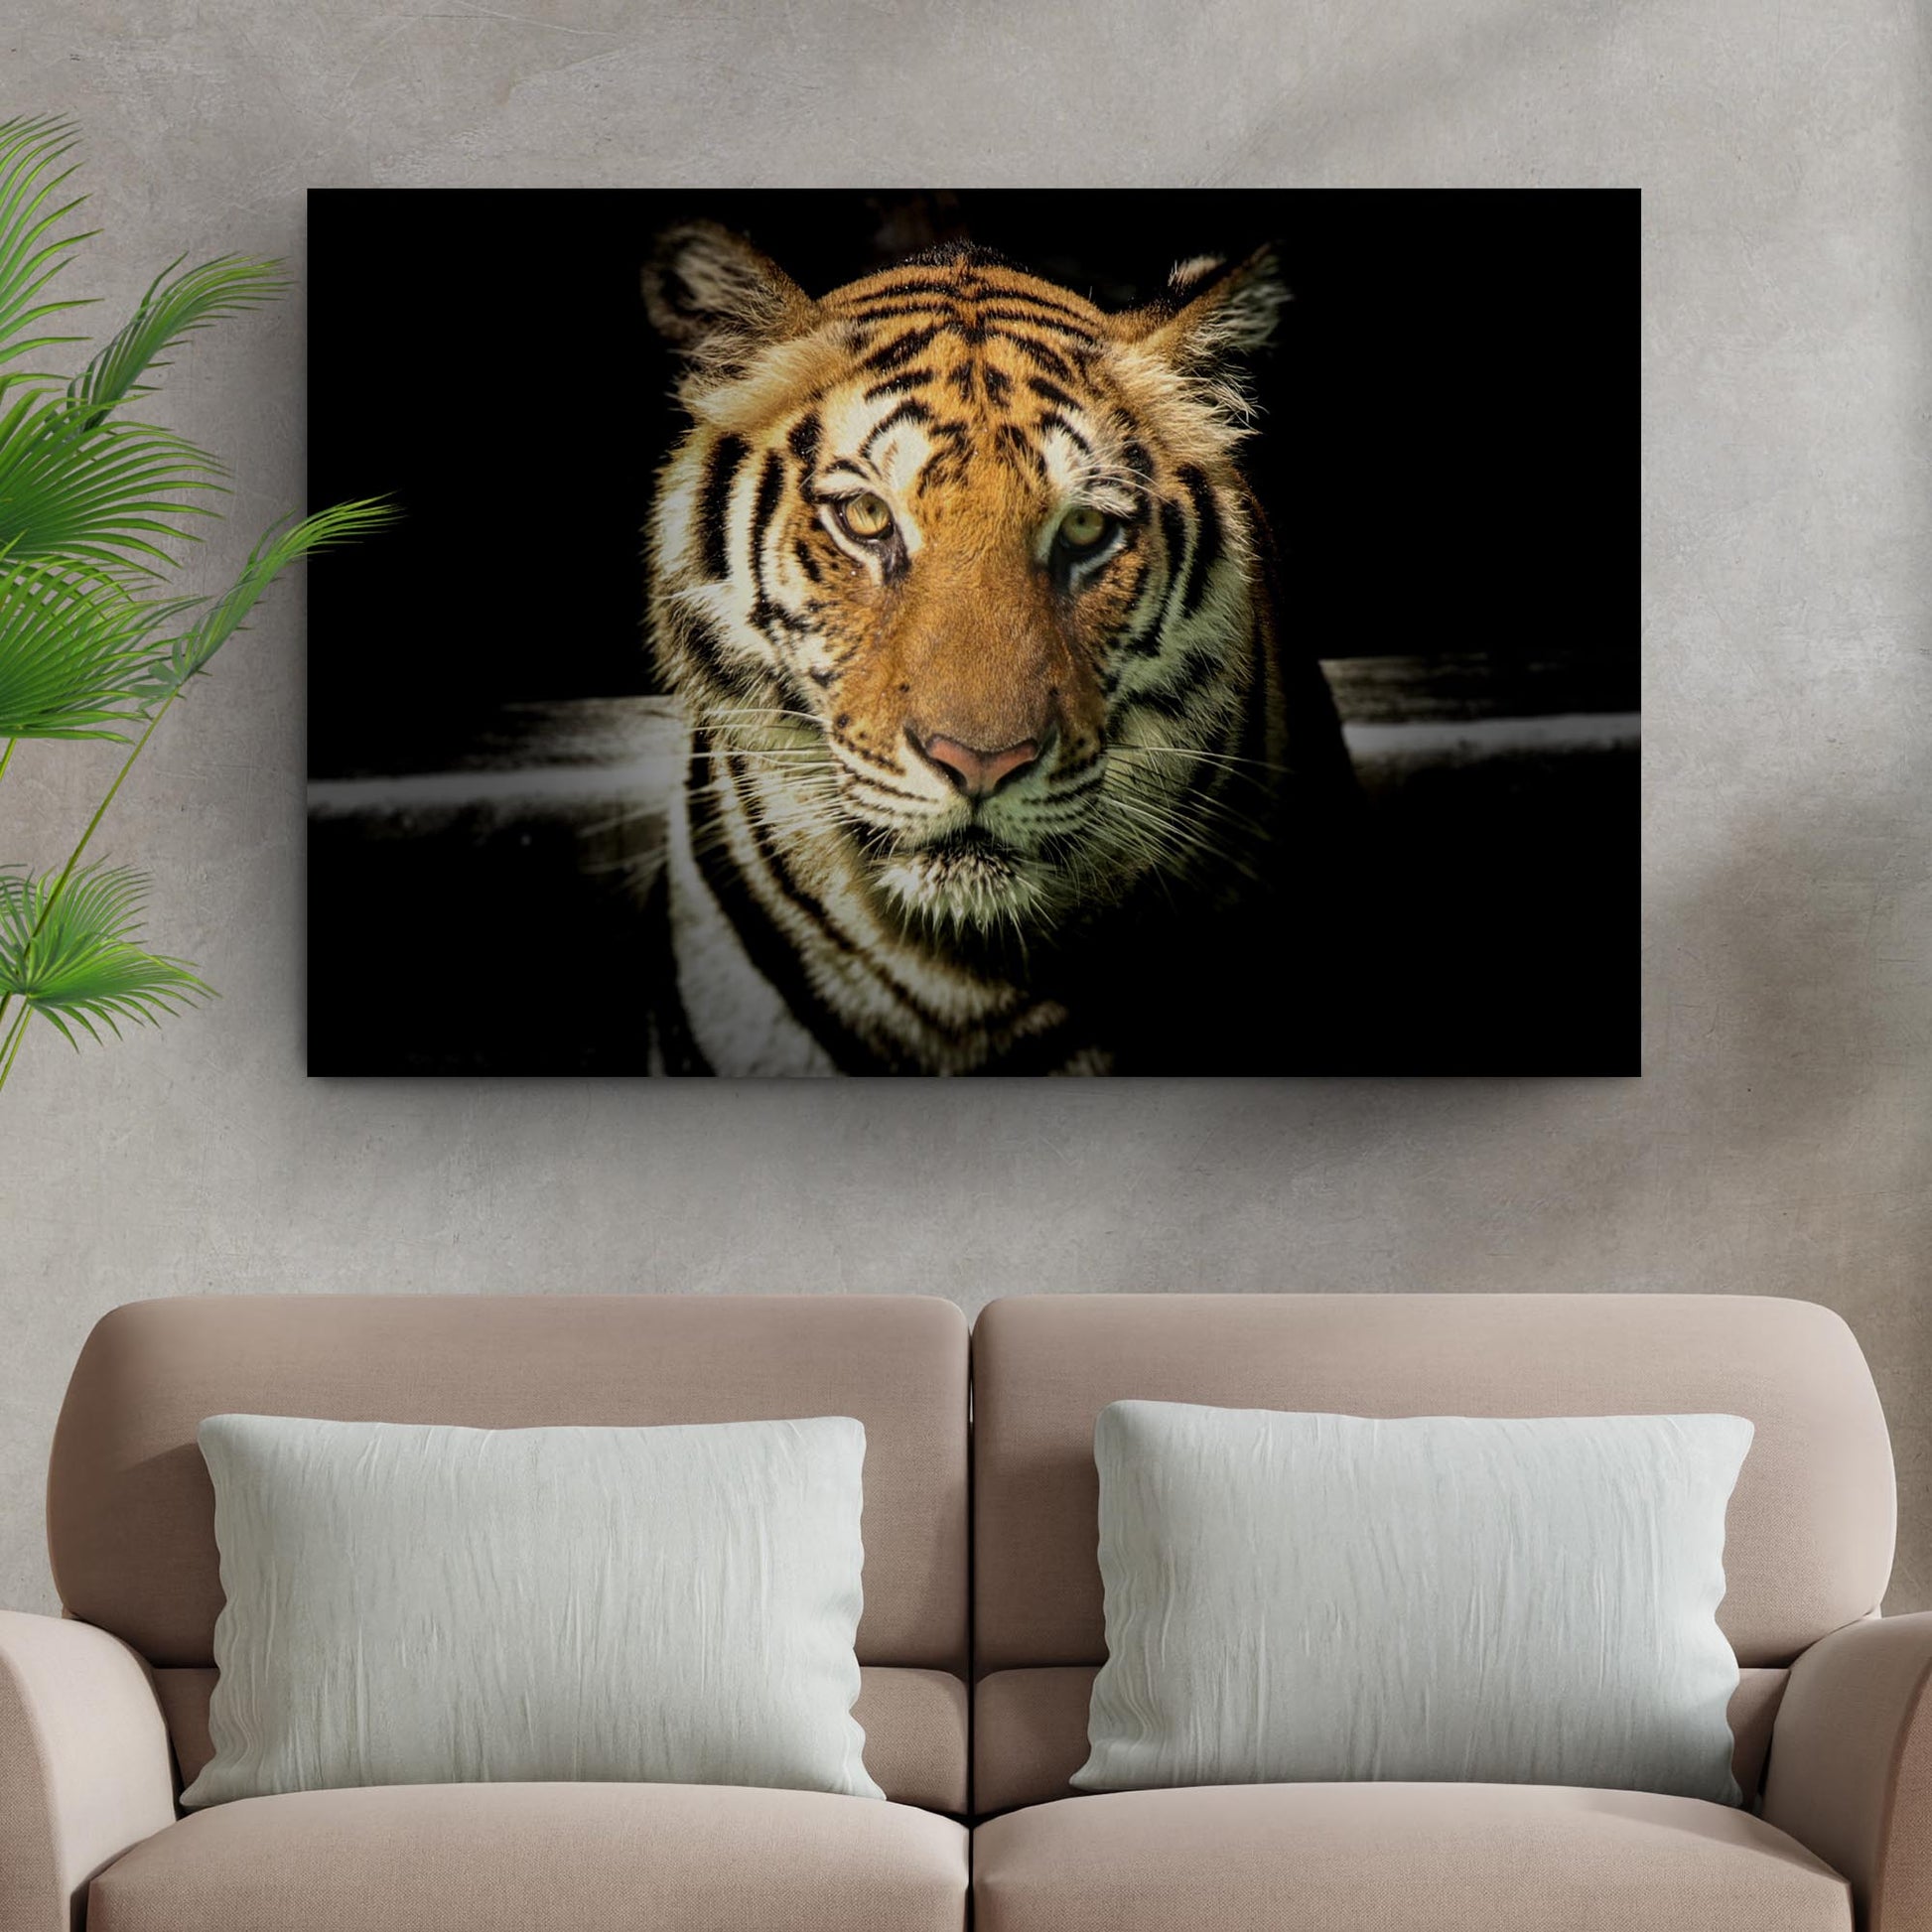 Lurking Tiger In The Dark Canvas Wall Art Style 1 - Image by Tailored Canvases